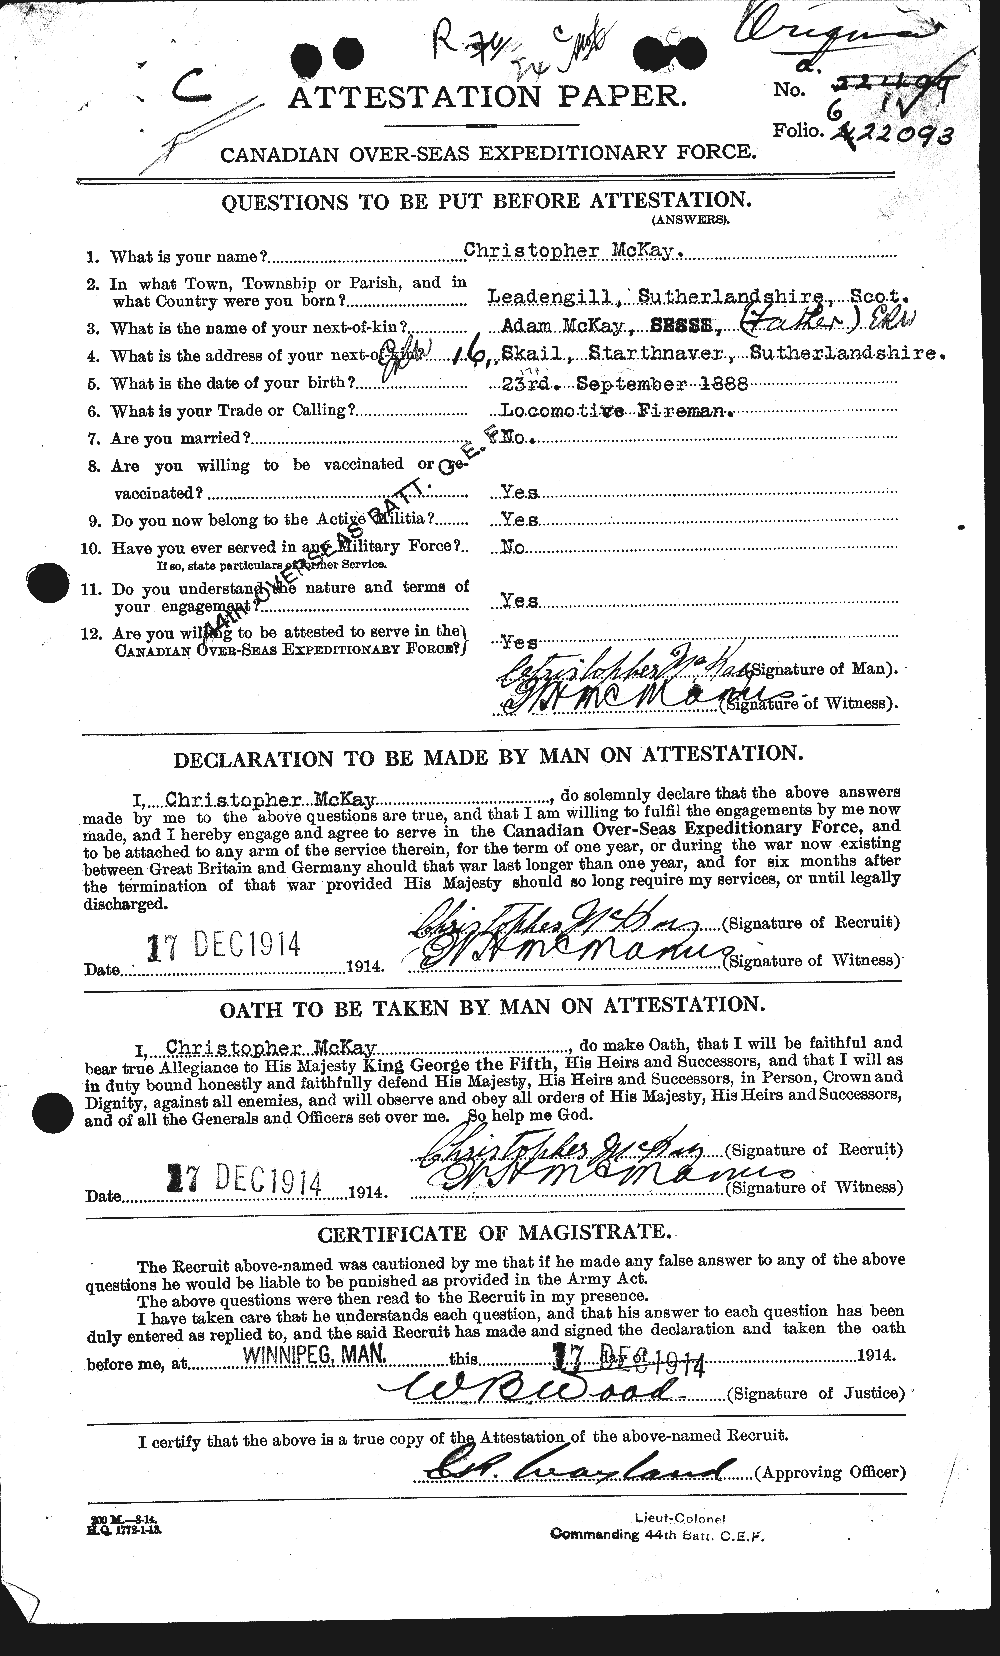 Personnel Records of the First World War - CEF 531087a